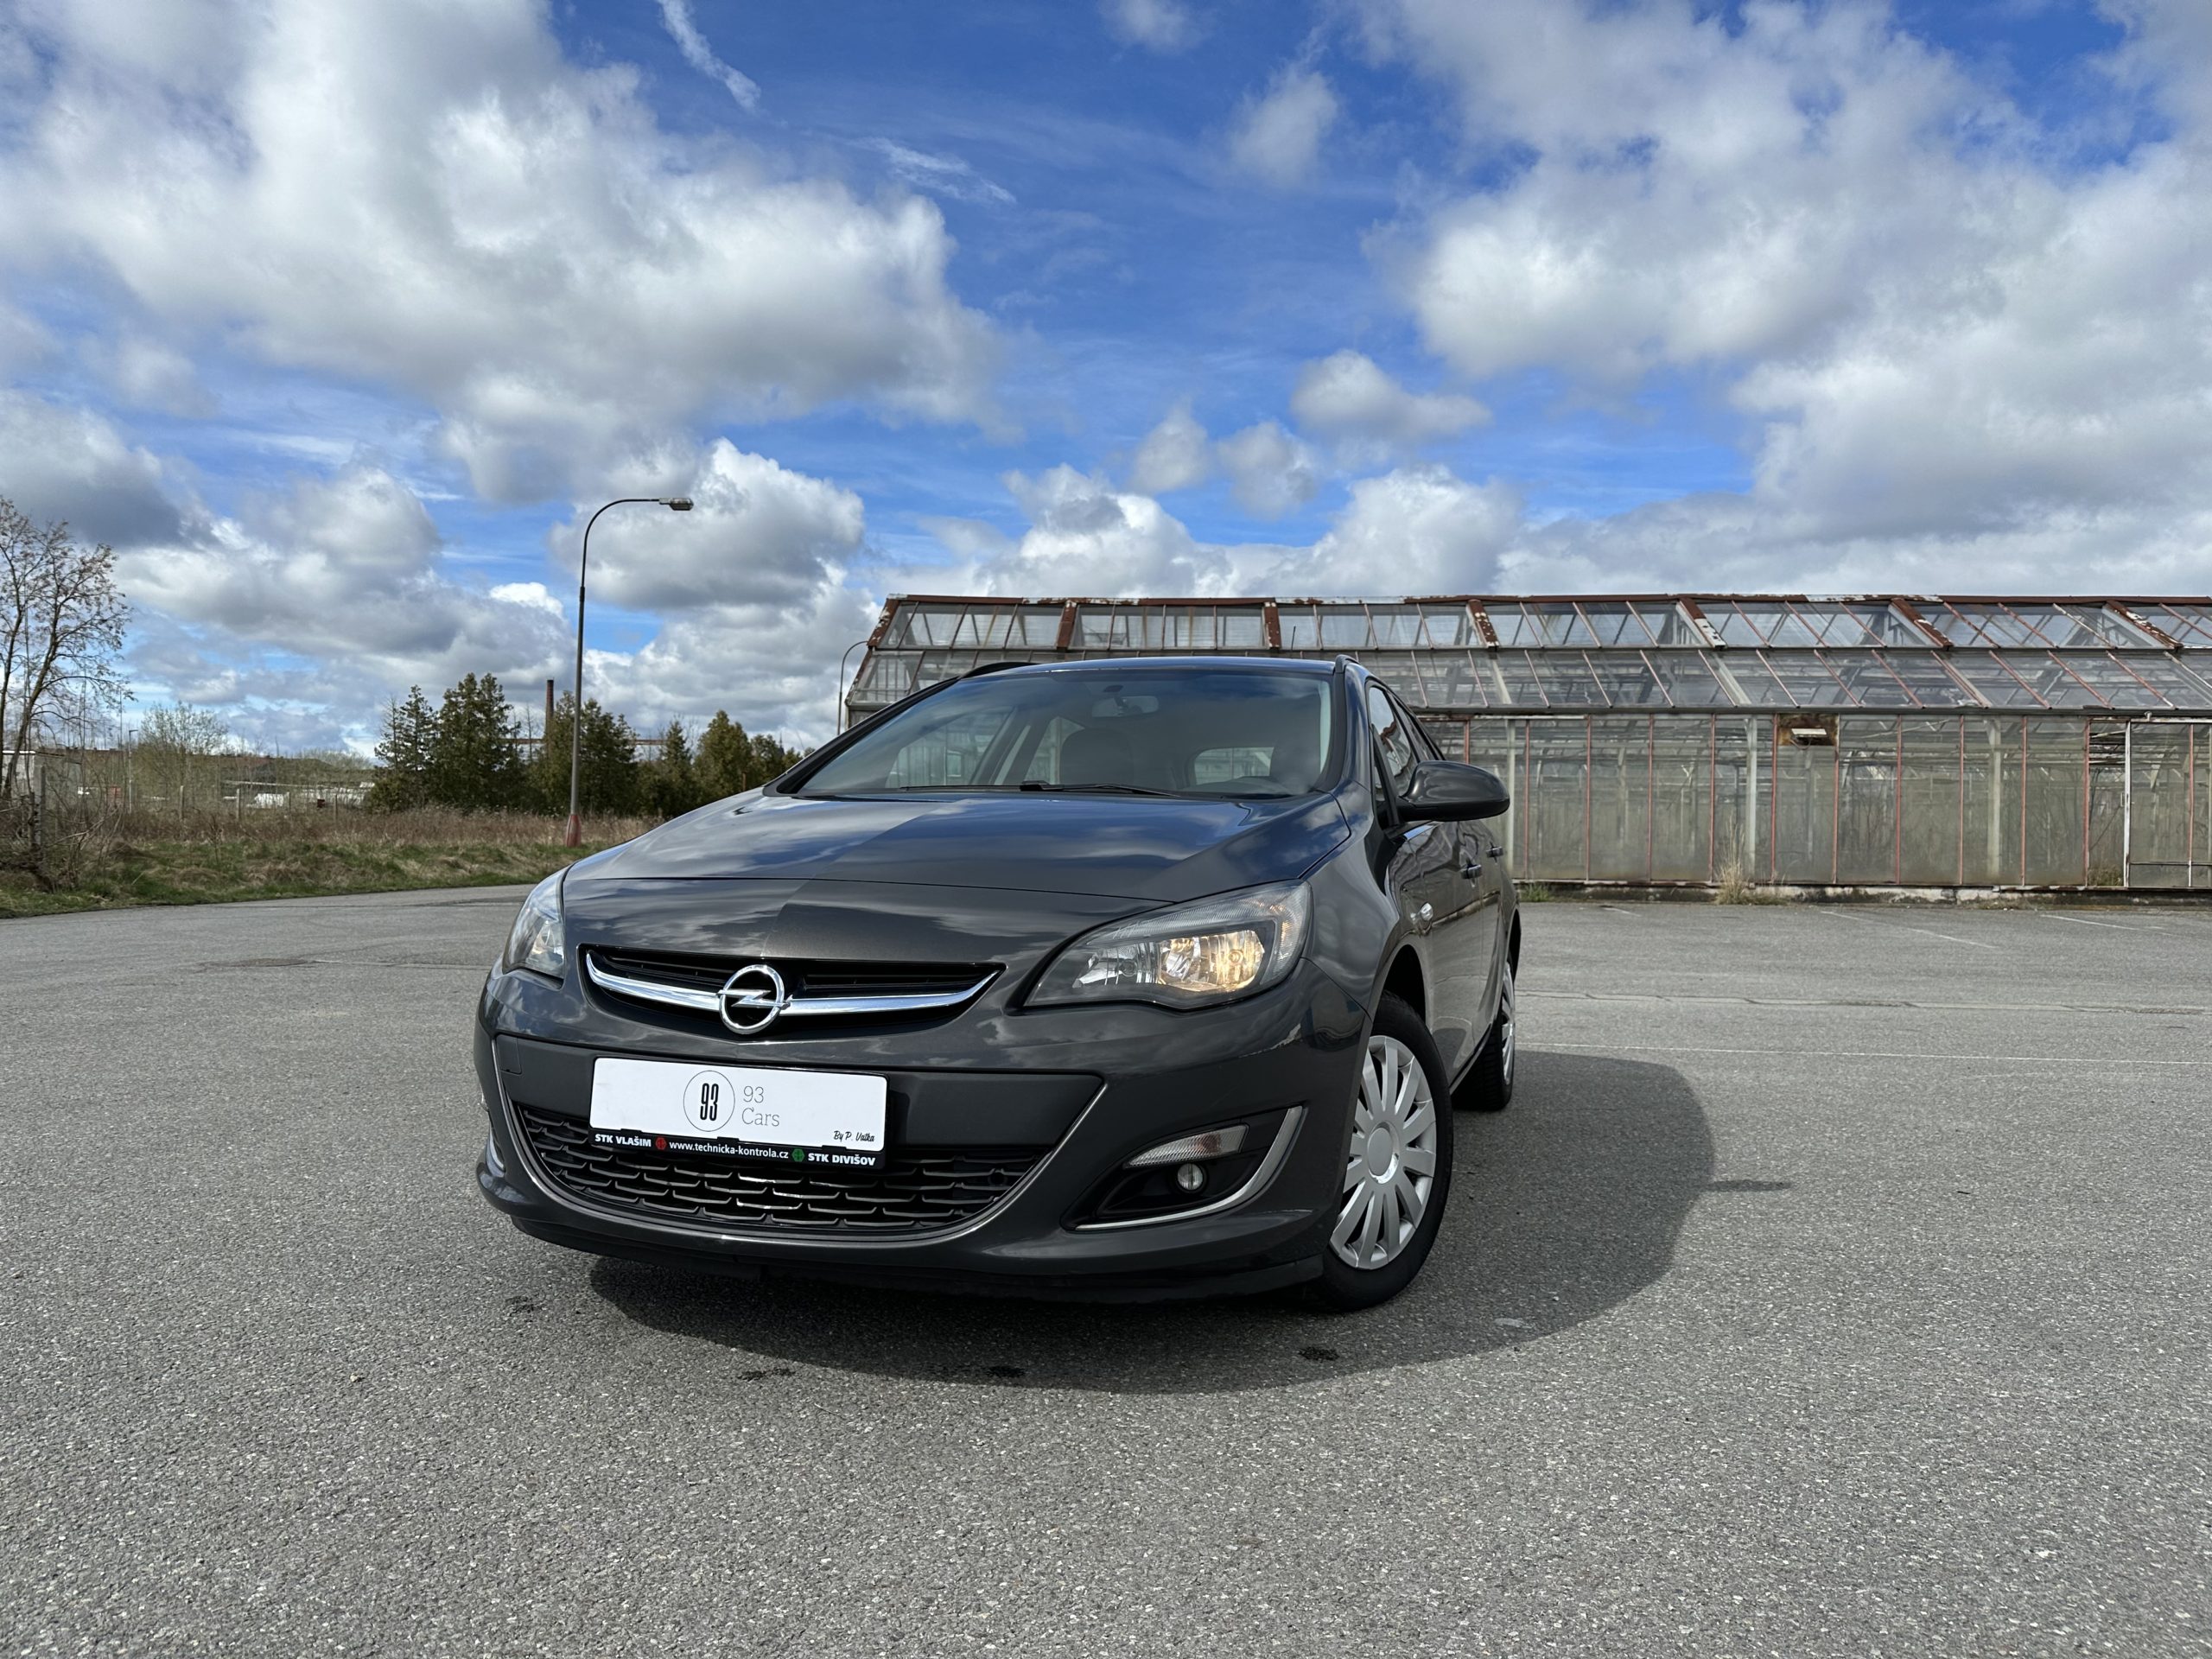 Prodáno] Opel Astra Sports Tourer Facelift 1.7 CDTi 2013 - 93 Cars by PD  Services